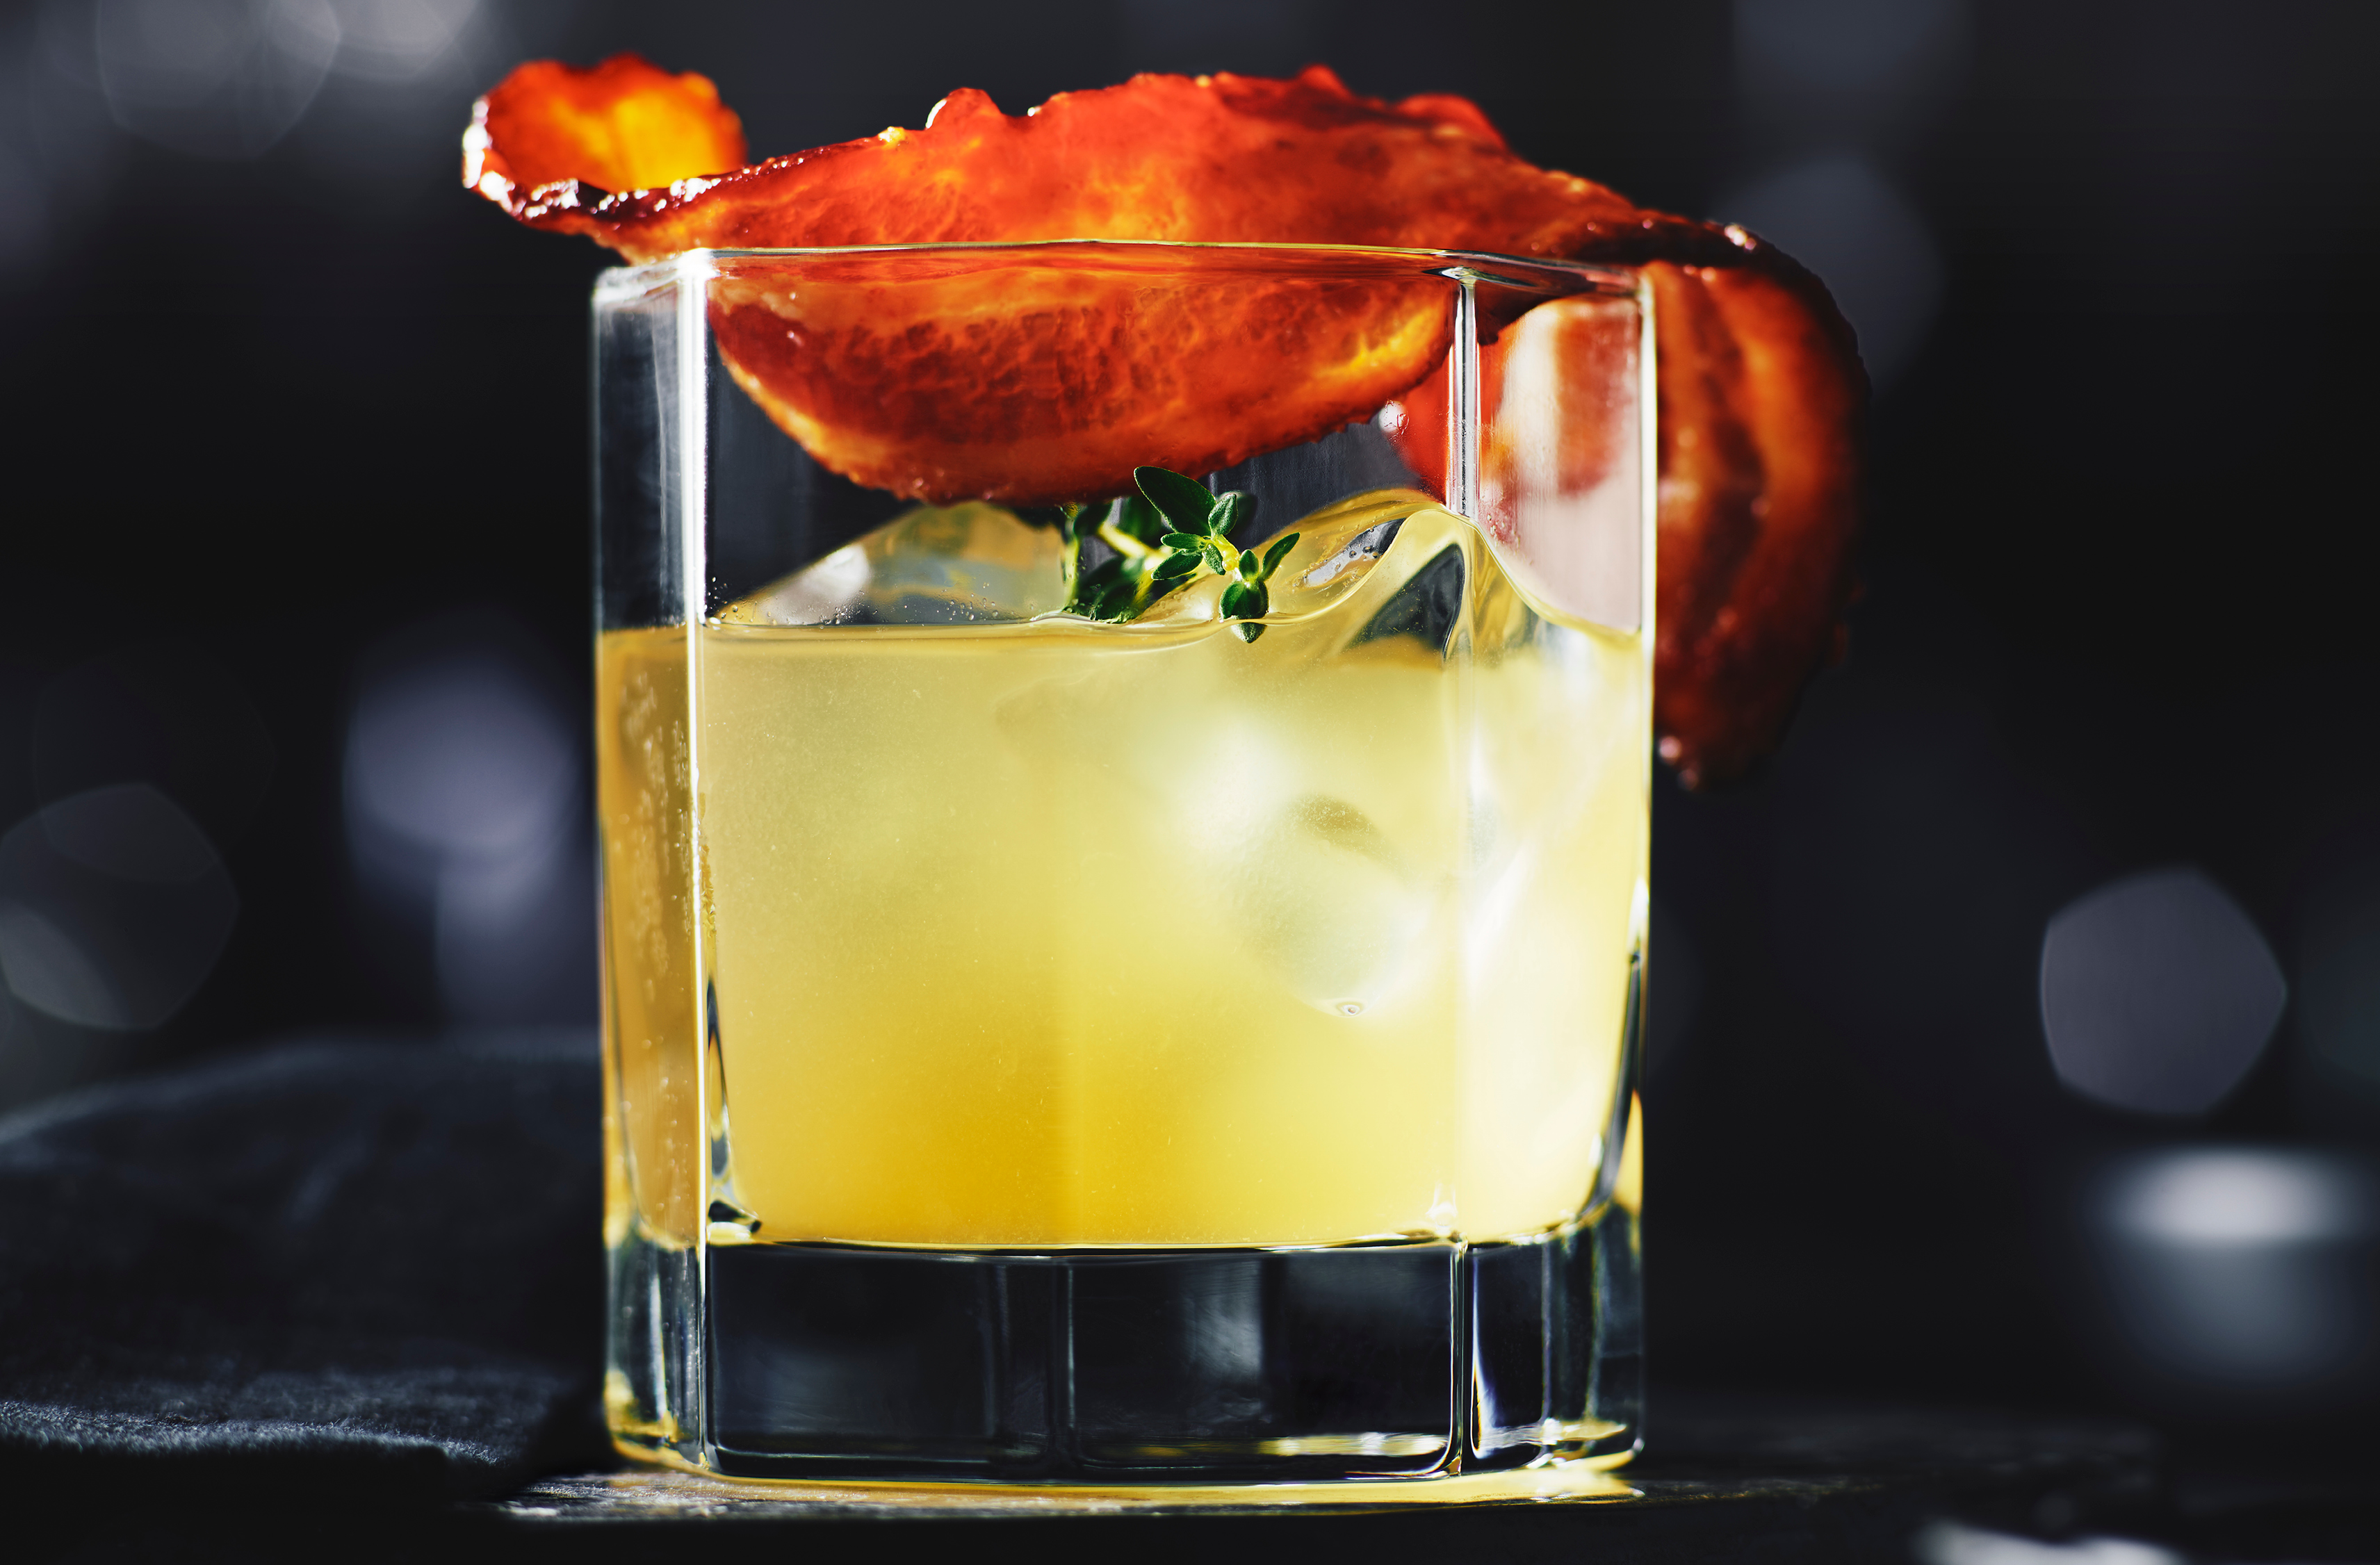 A glass of white peach bourbon shrub garnished with candied bacon
